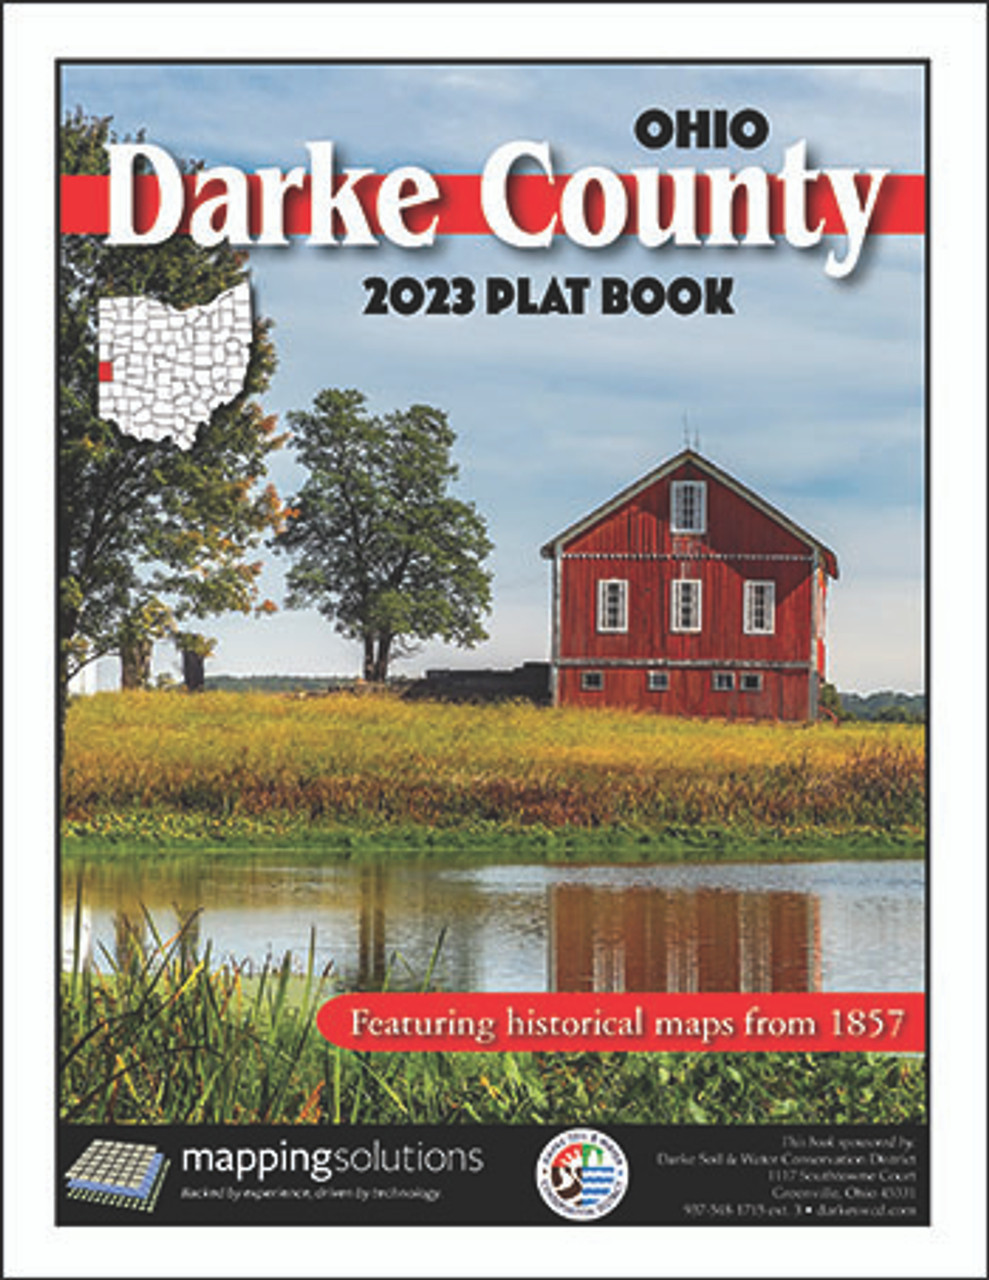 Darke County Ohio 2023 Plat Book | Mapping Solutions